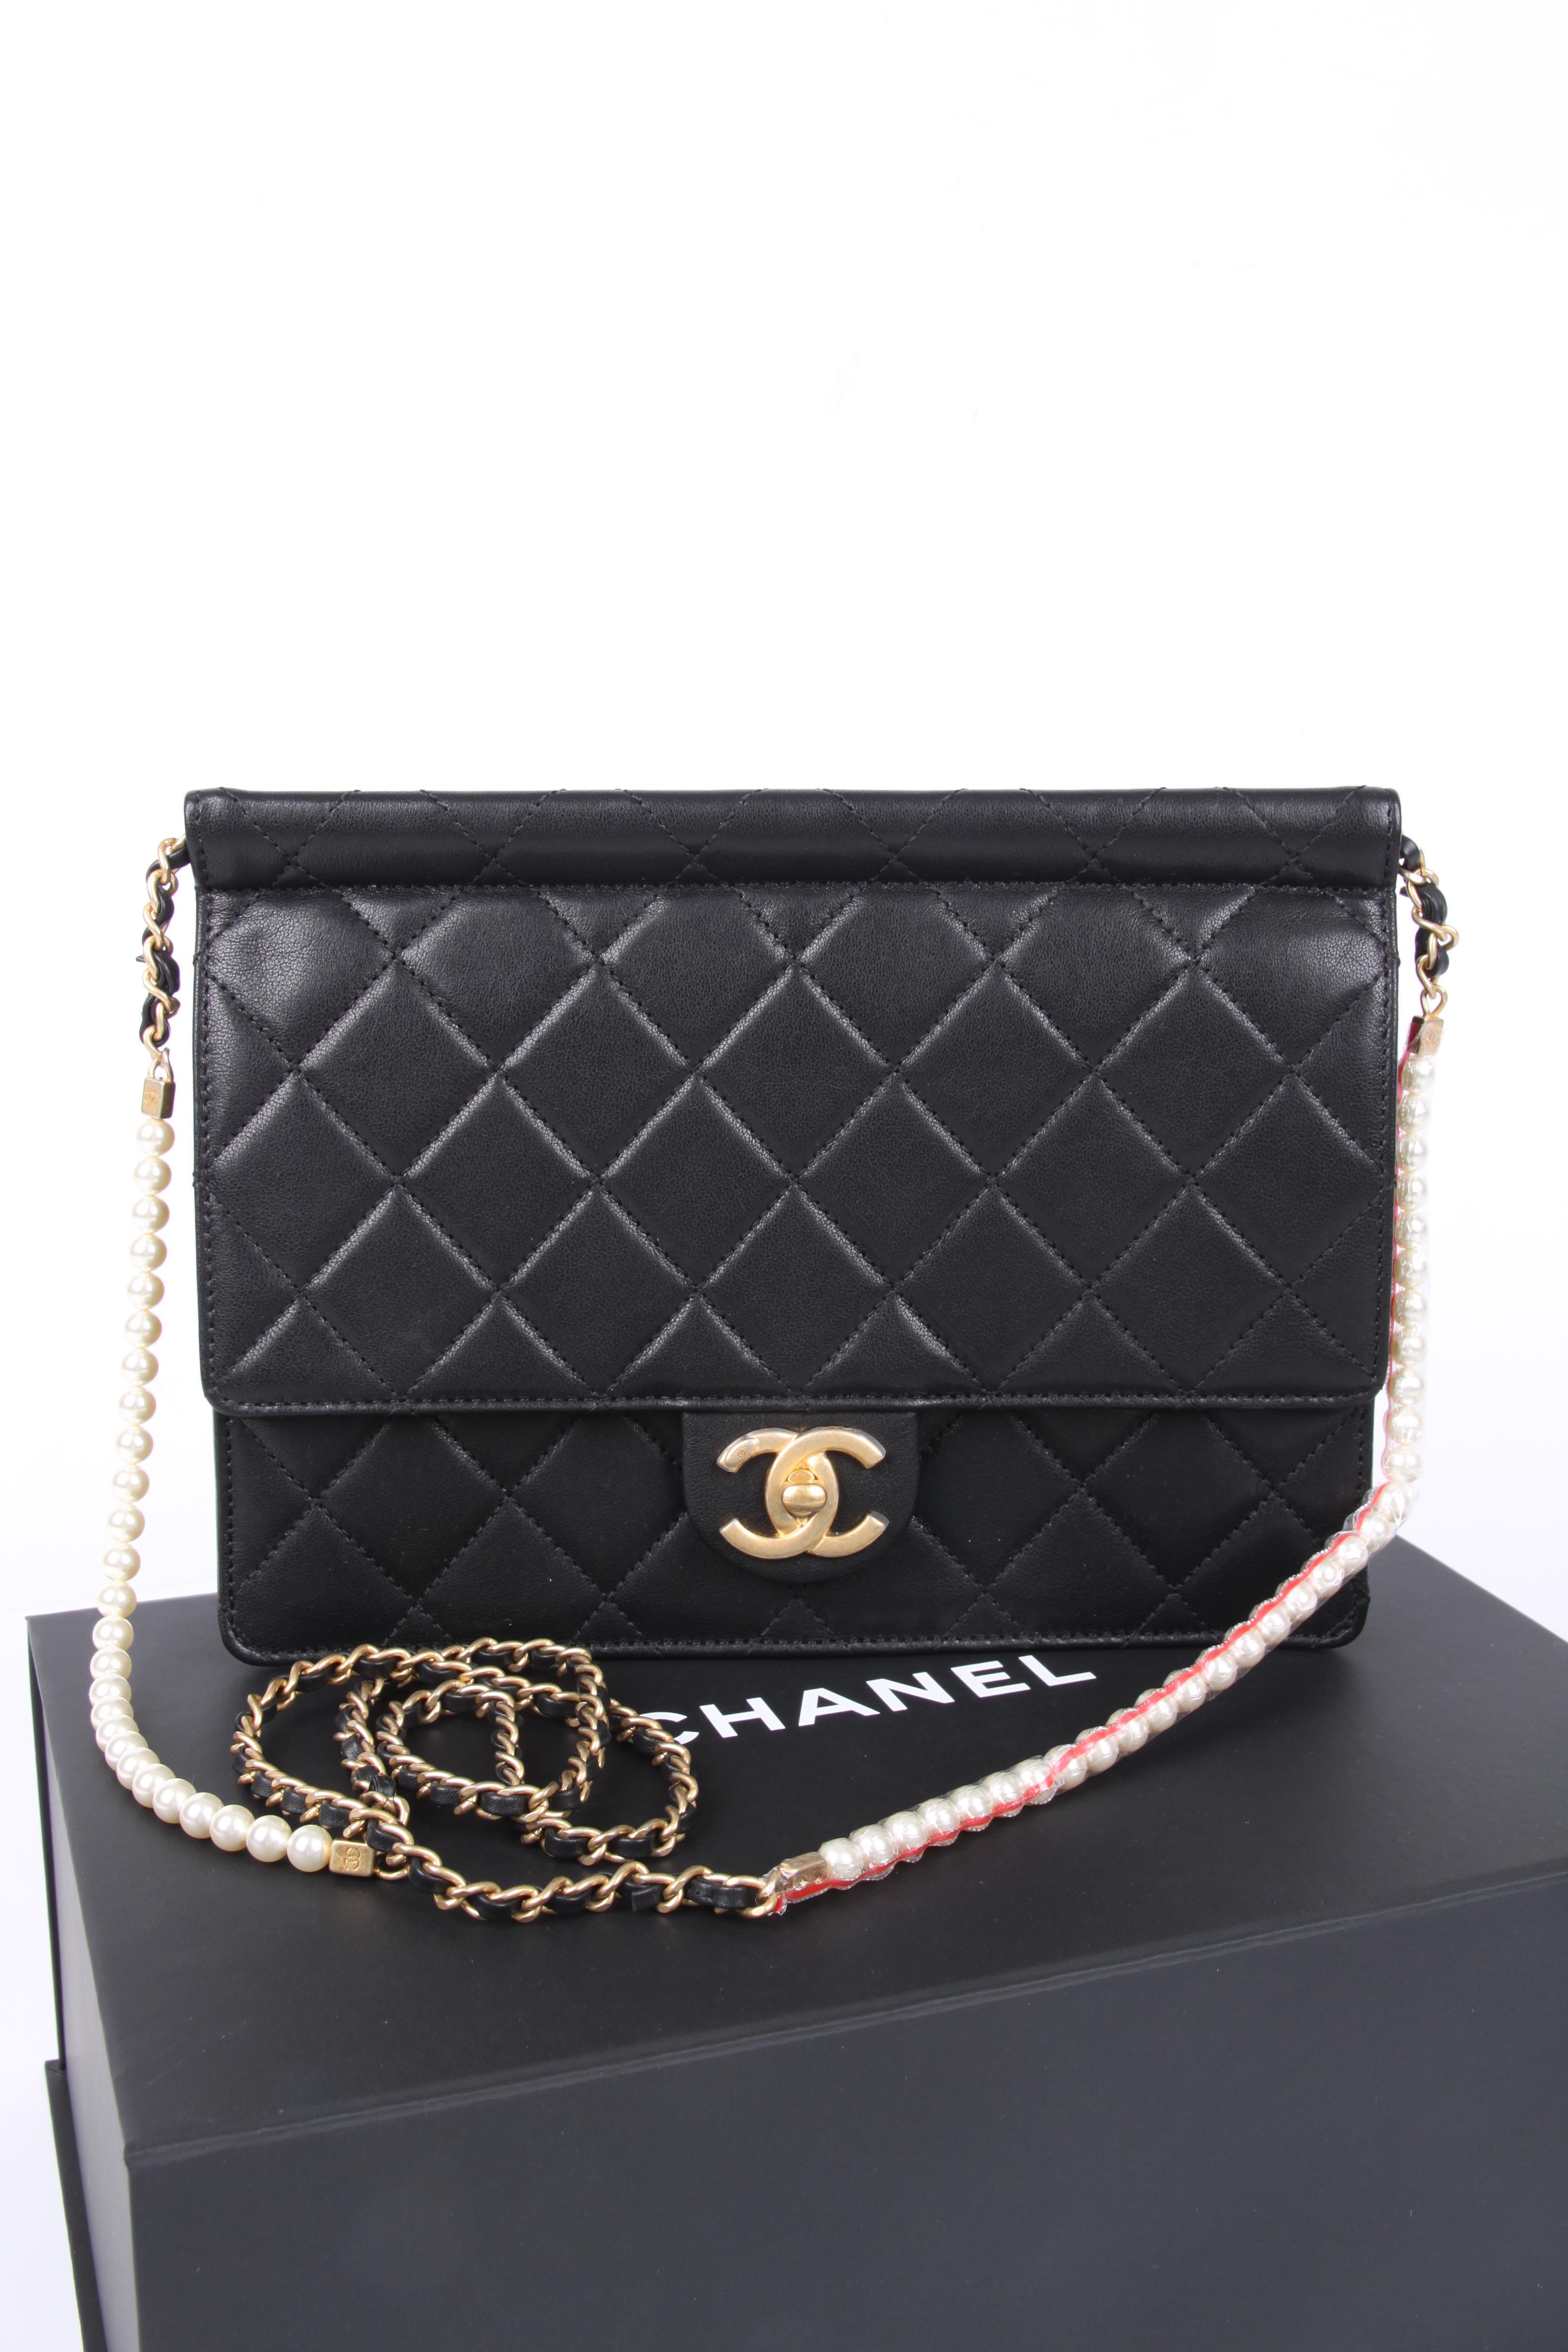 This one is from the latest collection, unfortunately it doesn't have a very sparkling or exciting name, at Chanel's they just call it 'Flap Bag'.

But it definitely is special; it has a handy size, matte gold-tone hardware and as much as two rows